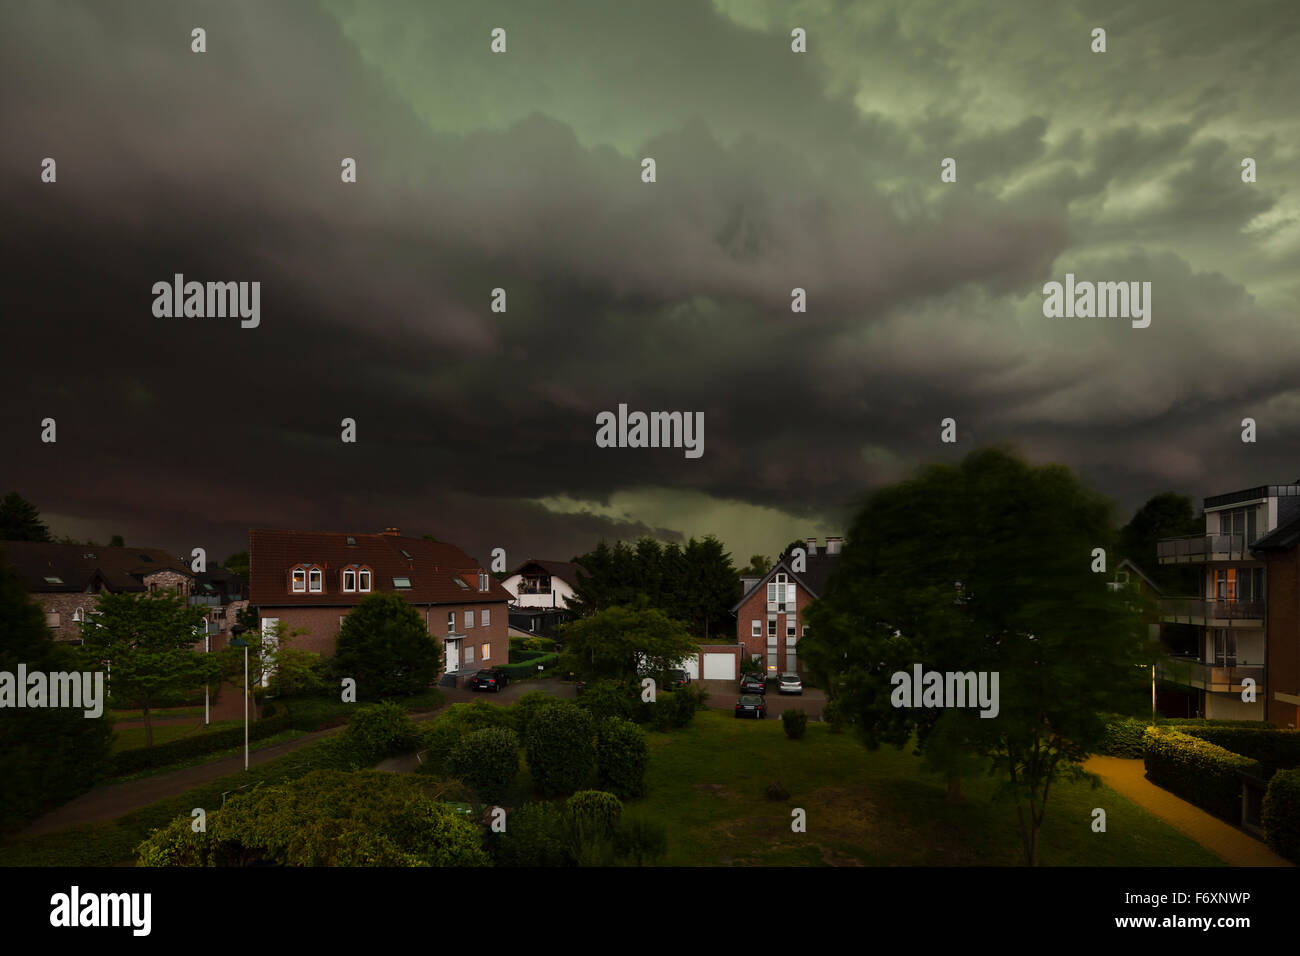 Approaching Thunderstorm Over Residential District Stock Photo